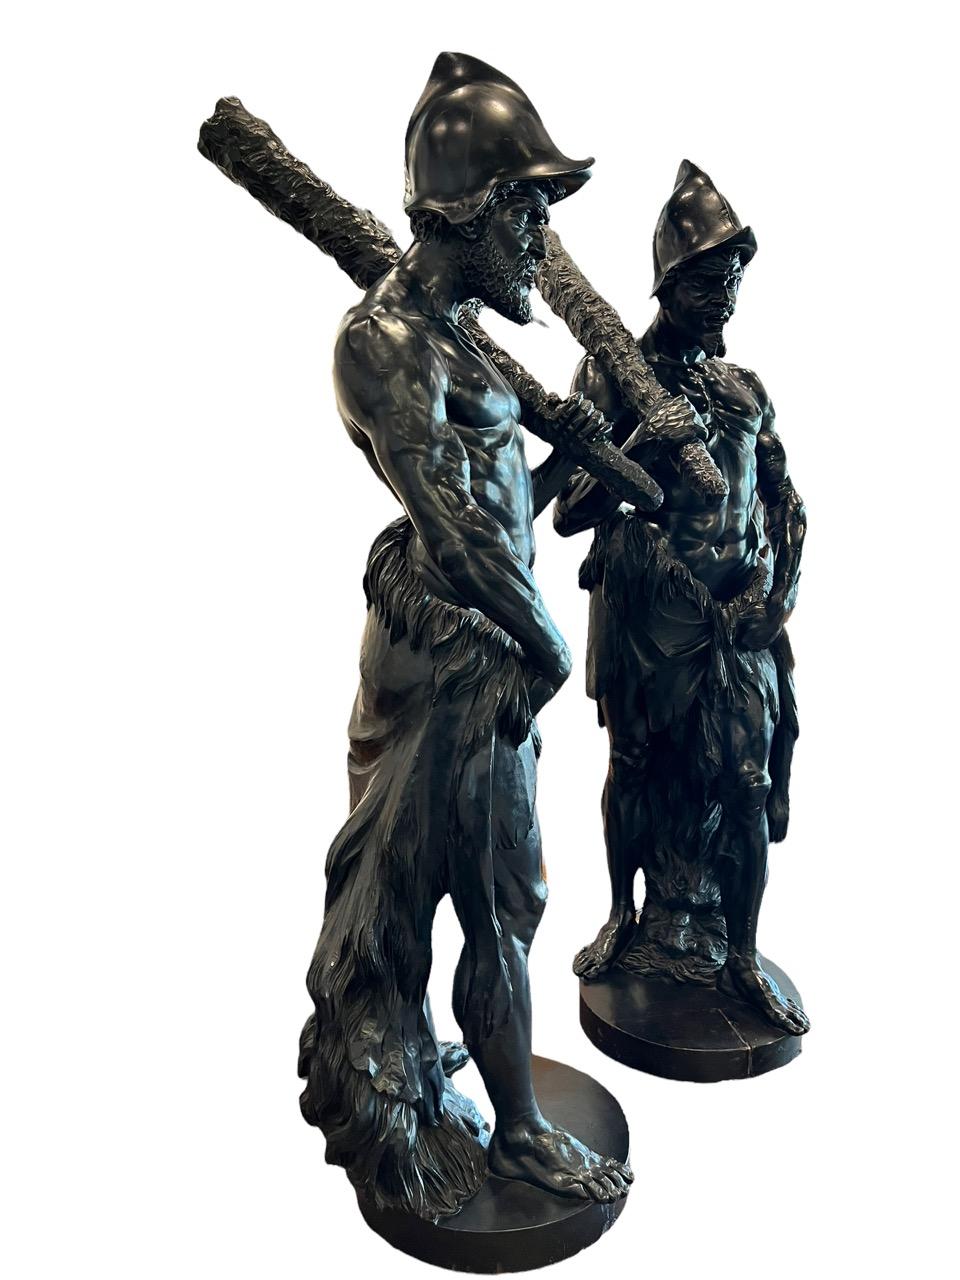 Behold an extraordinary pair of 17th Century Spanish ebonized wood sculptures that stand as a mesmerizing fusion of cultures and artistic mastery. These striking sculptures depict European soldiers adorned in the regalia of African tribal battle